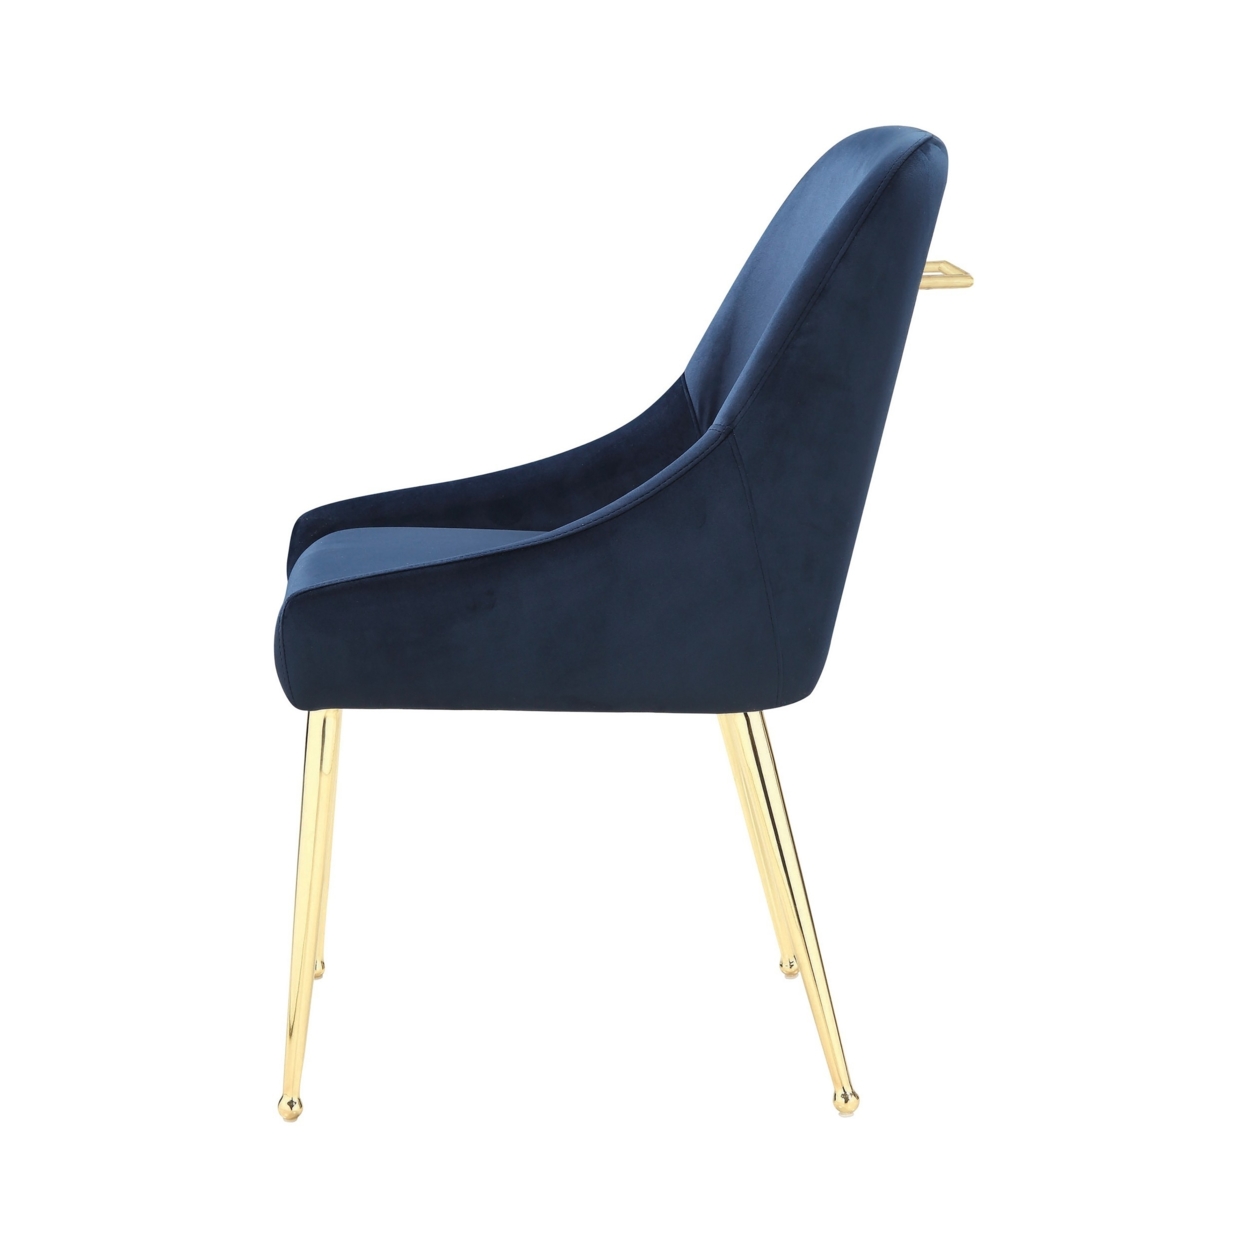 23 Inch Side Chair, Set Of 2, Blue Fabric, Sloped Arms, Gold Metal Legs- Saltoro Sherpi